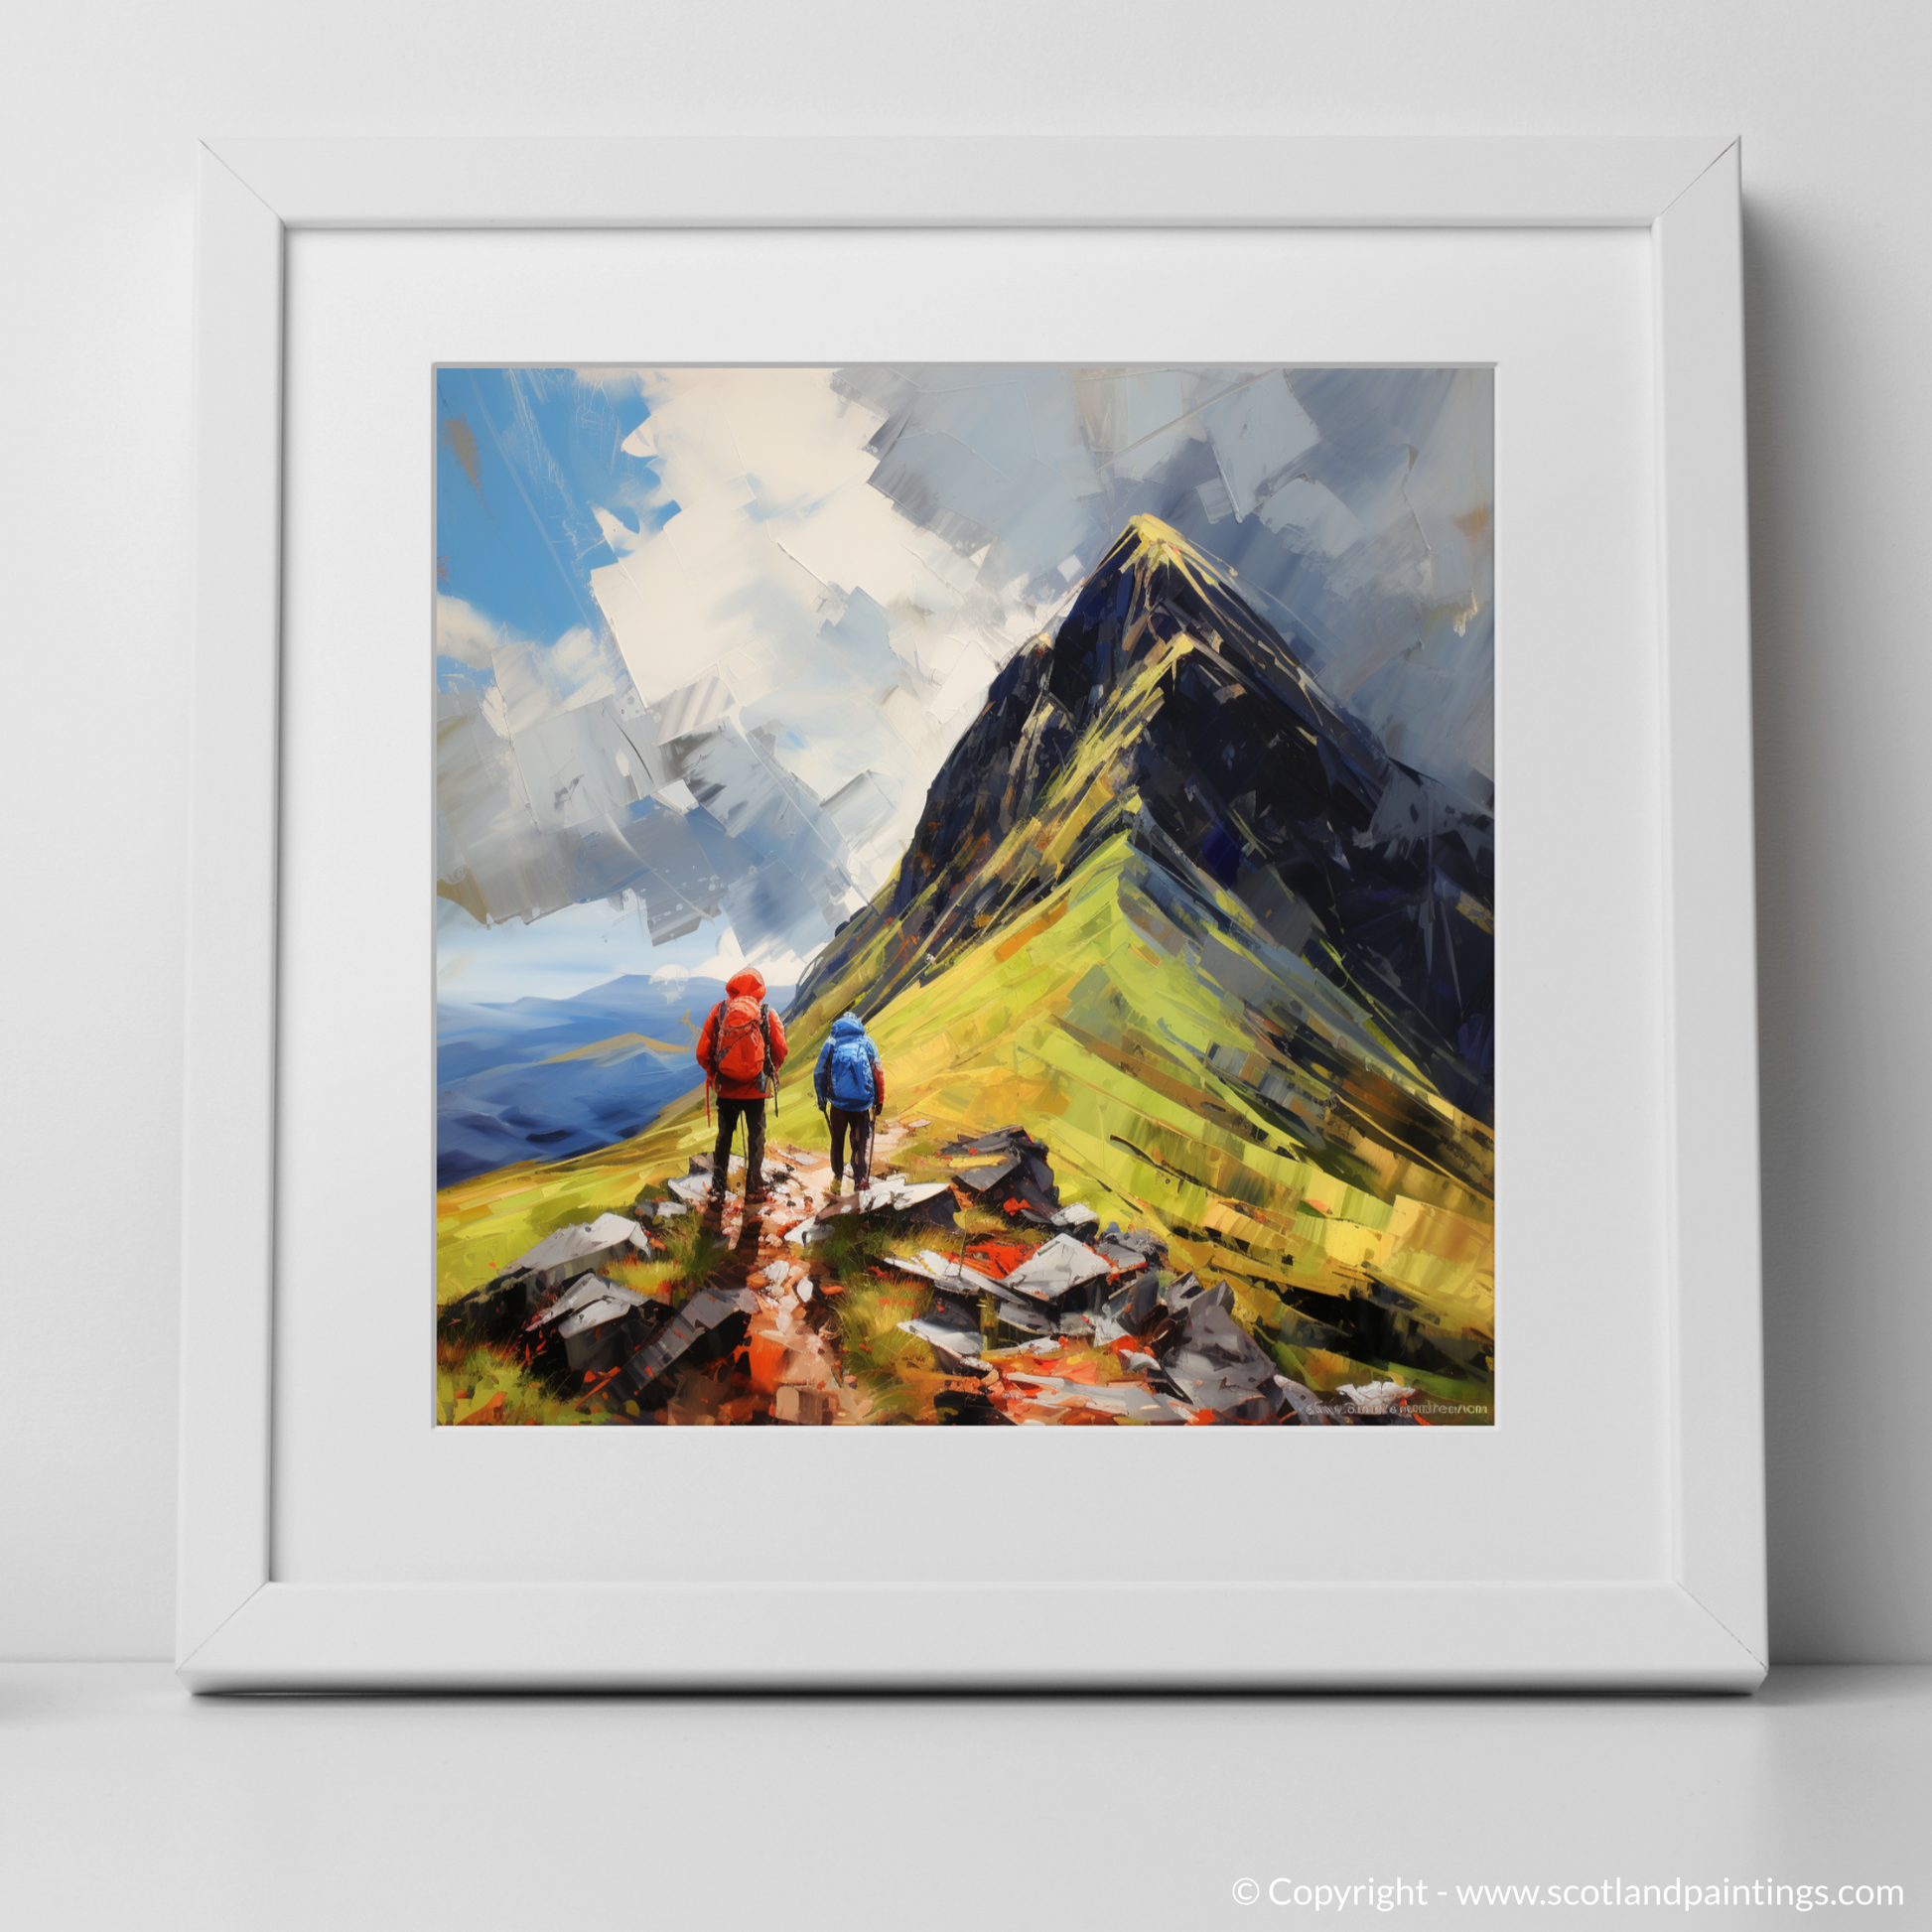 Art Print of Hikers at Buachaille summit in Glencoe with a white frame